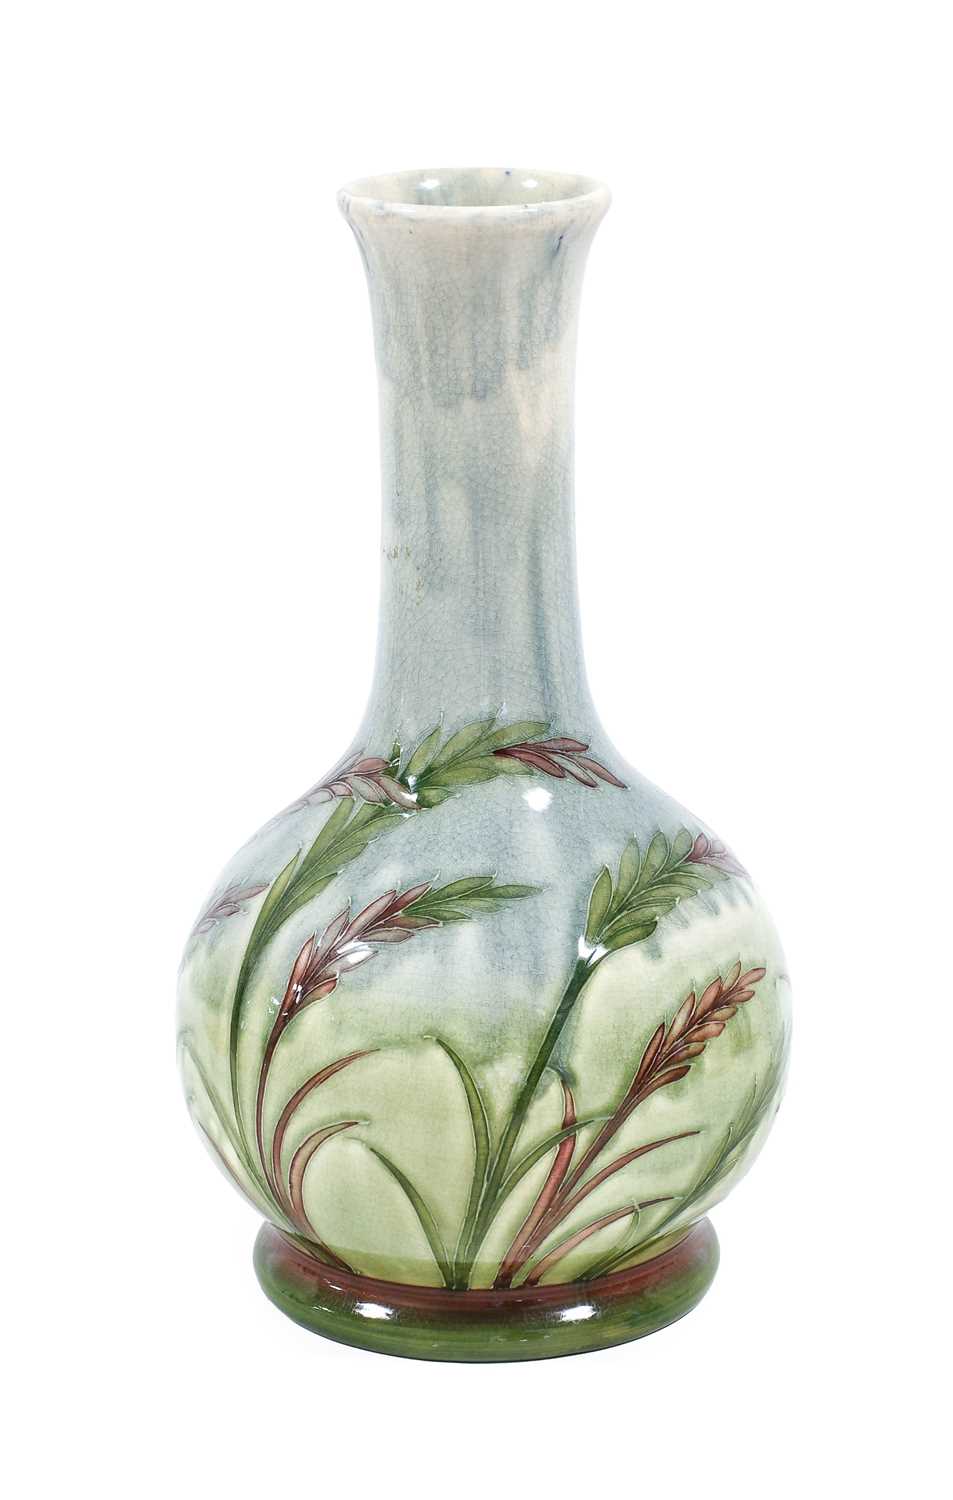 William Moorcroft (1872-1945): A Waving Corn Pattern Vase, on a pale ground, green painted